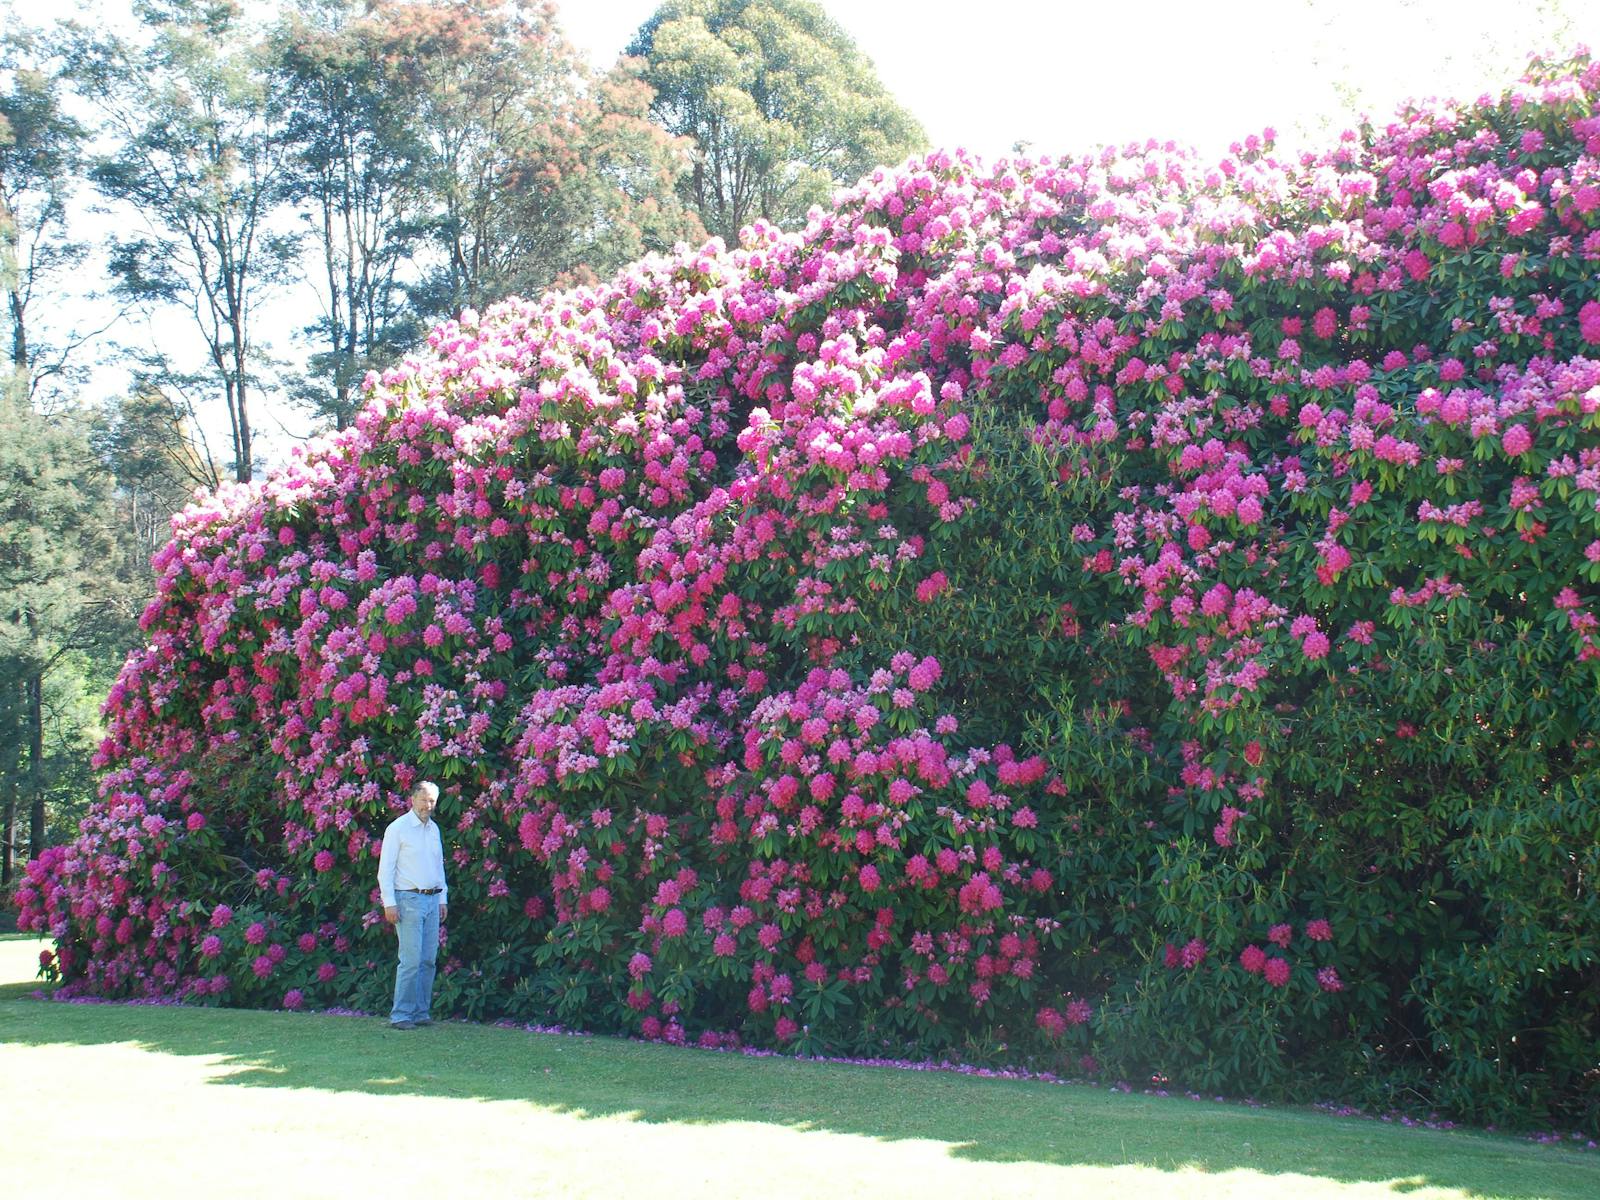 Heritage rhododendrons blooming late October. These are 8m high, possibly the largest in Australia